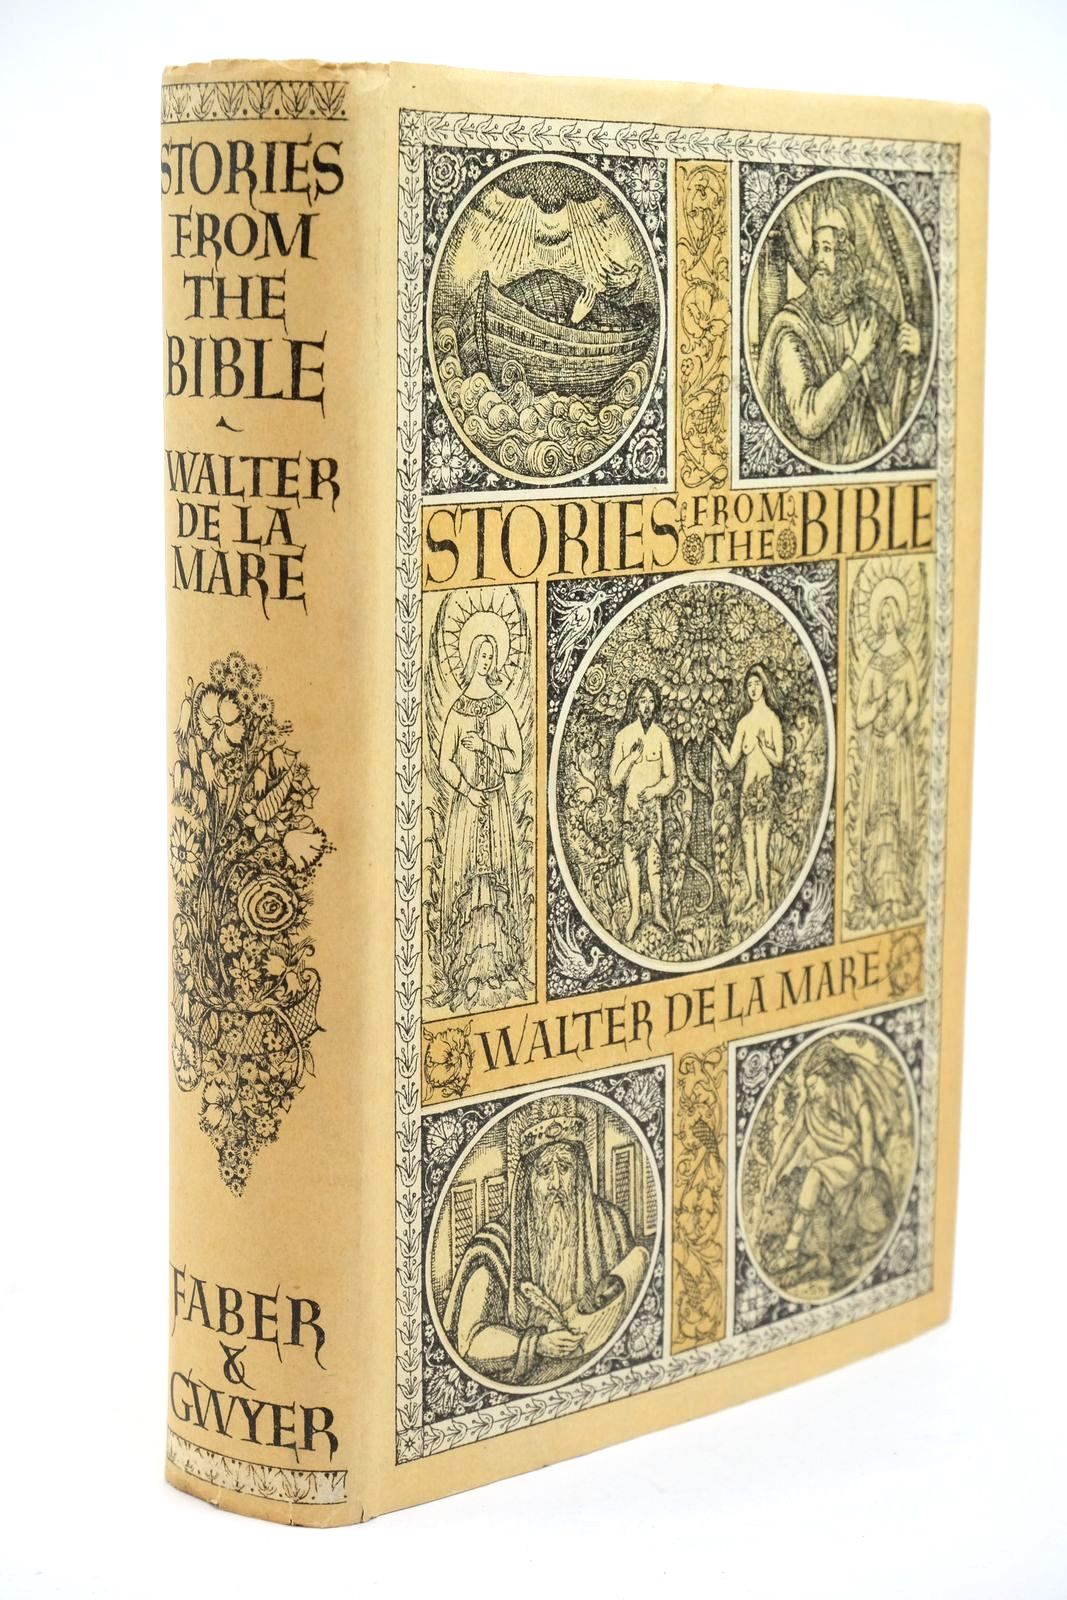 Photo of STORIES FROM THE BIBLE written by De La Mare, Walter published by Faber &amp; Gwyer (STOCK CODE: 1322911)  for sale by Stella & Rose's Books